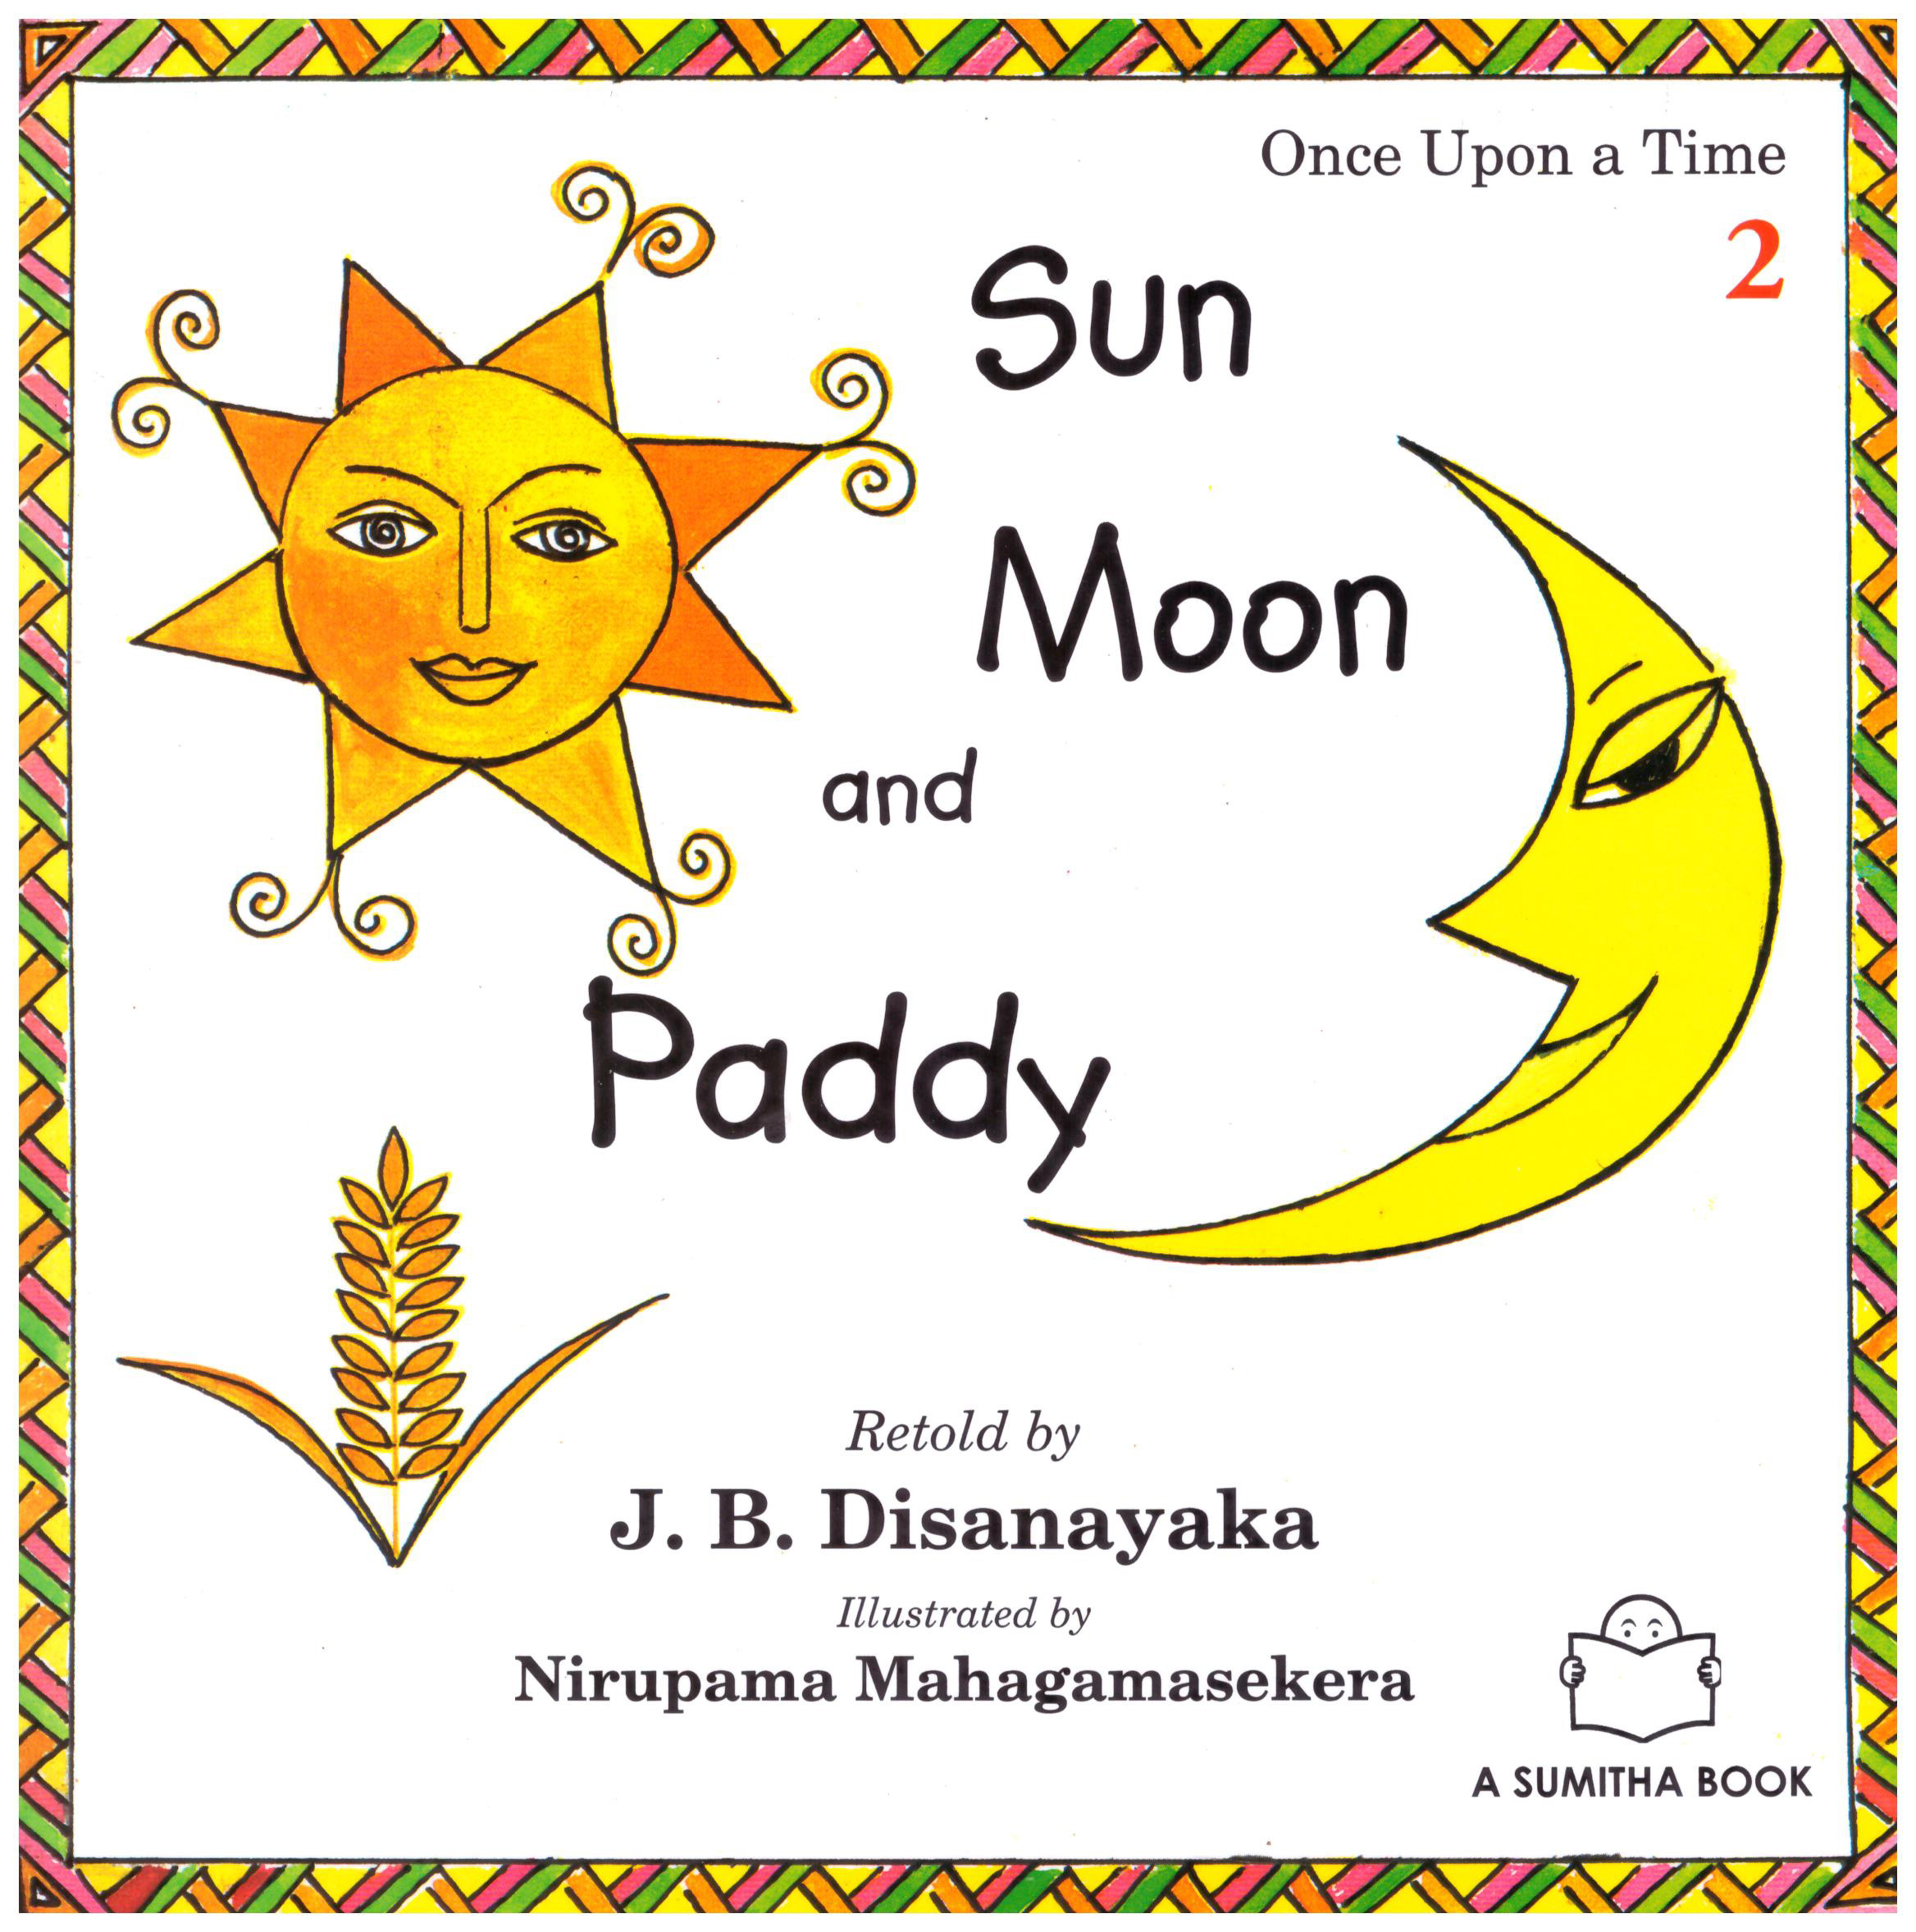 Once Upon a Time 02 - Sun Moon and Paddy